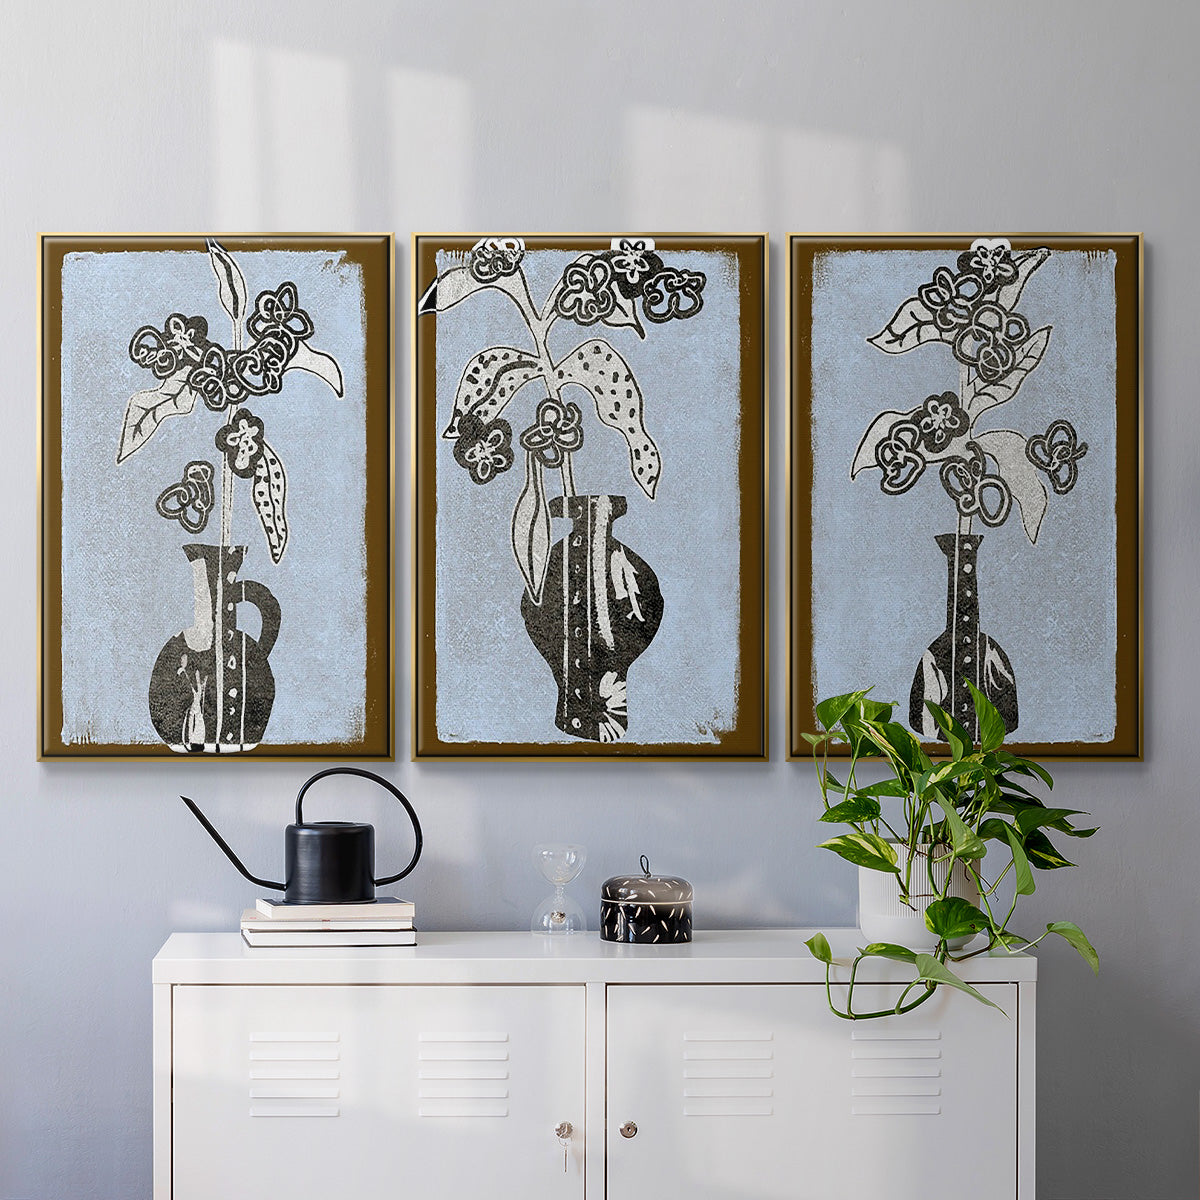 Graphic Flowers in Vase I - Framed Premium Gallery Wrapped Canvas L Frame 3 Piece Set - Ready to Hang